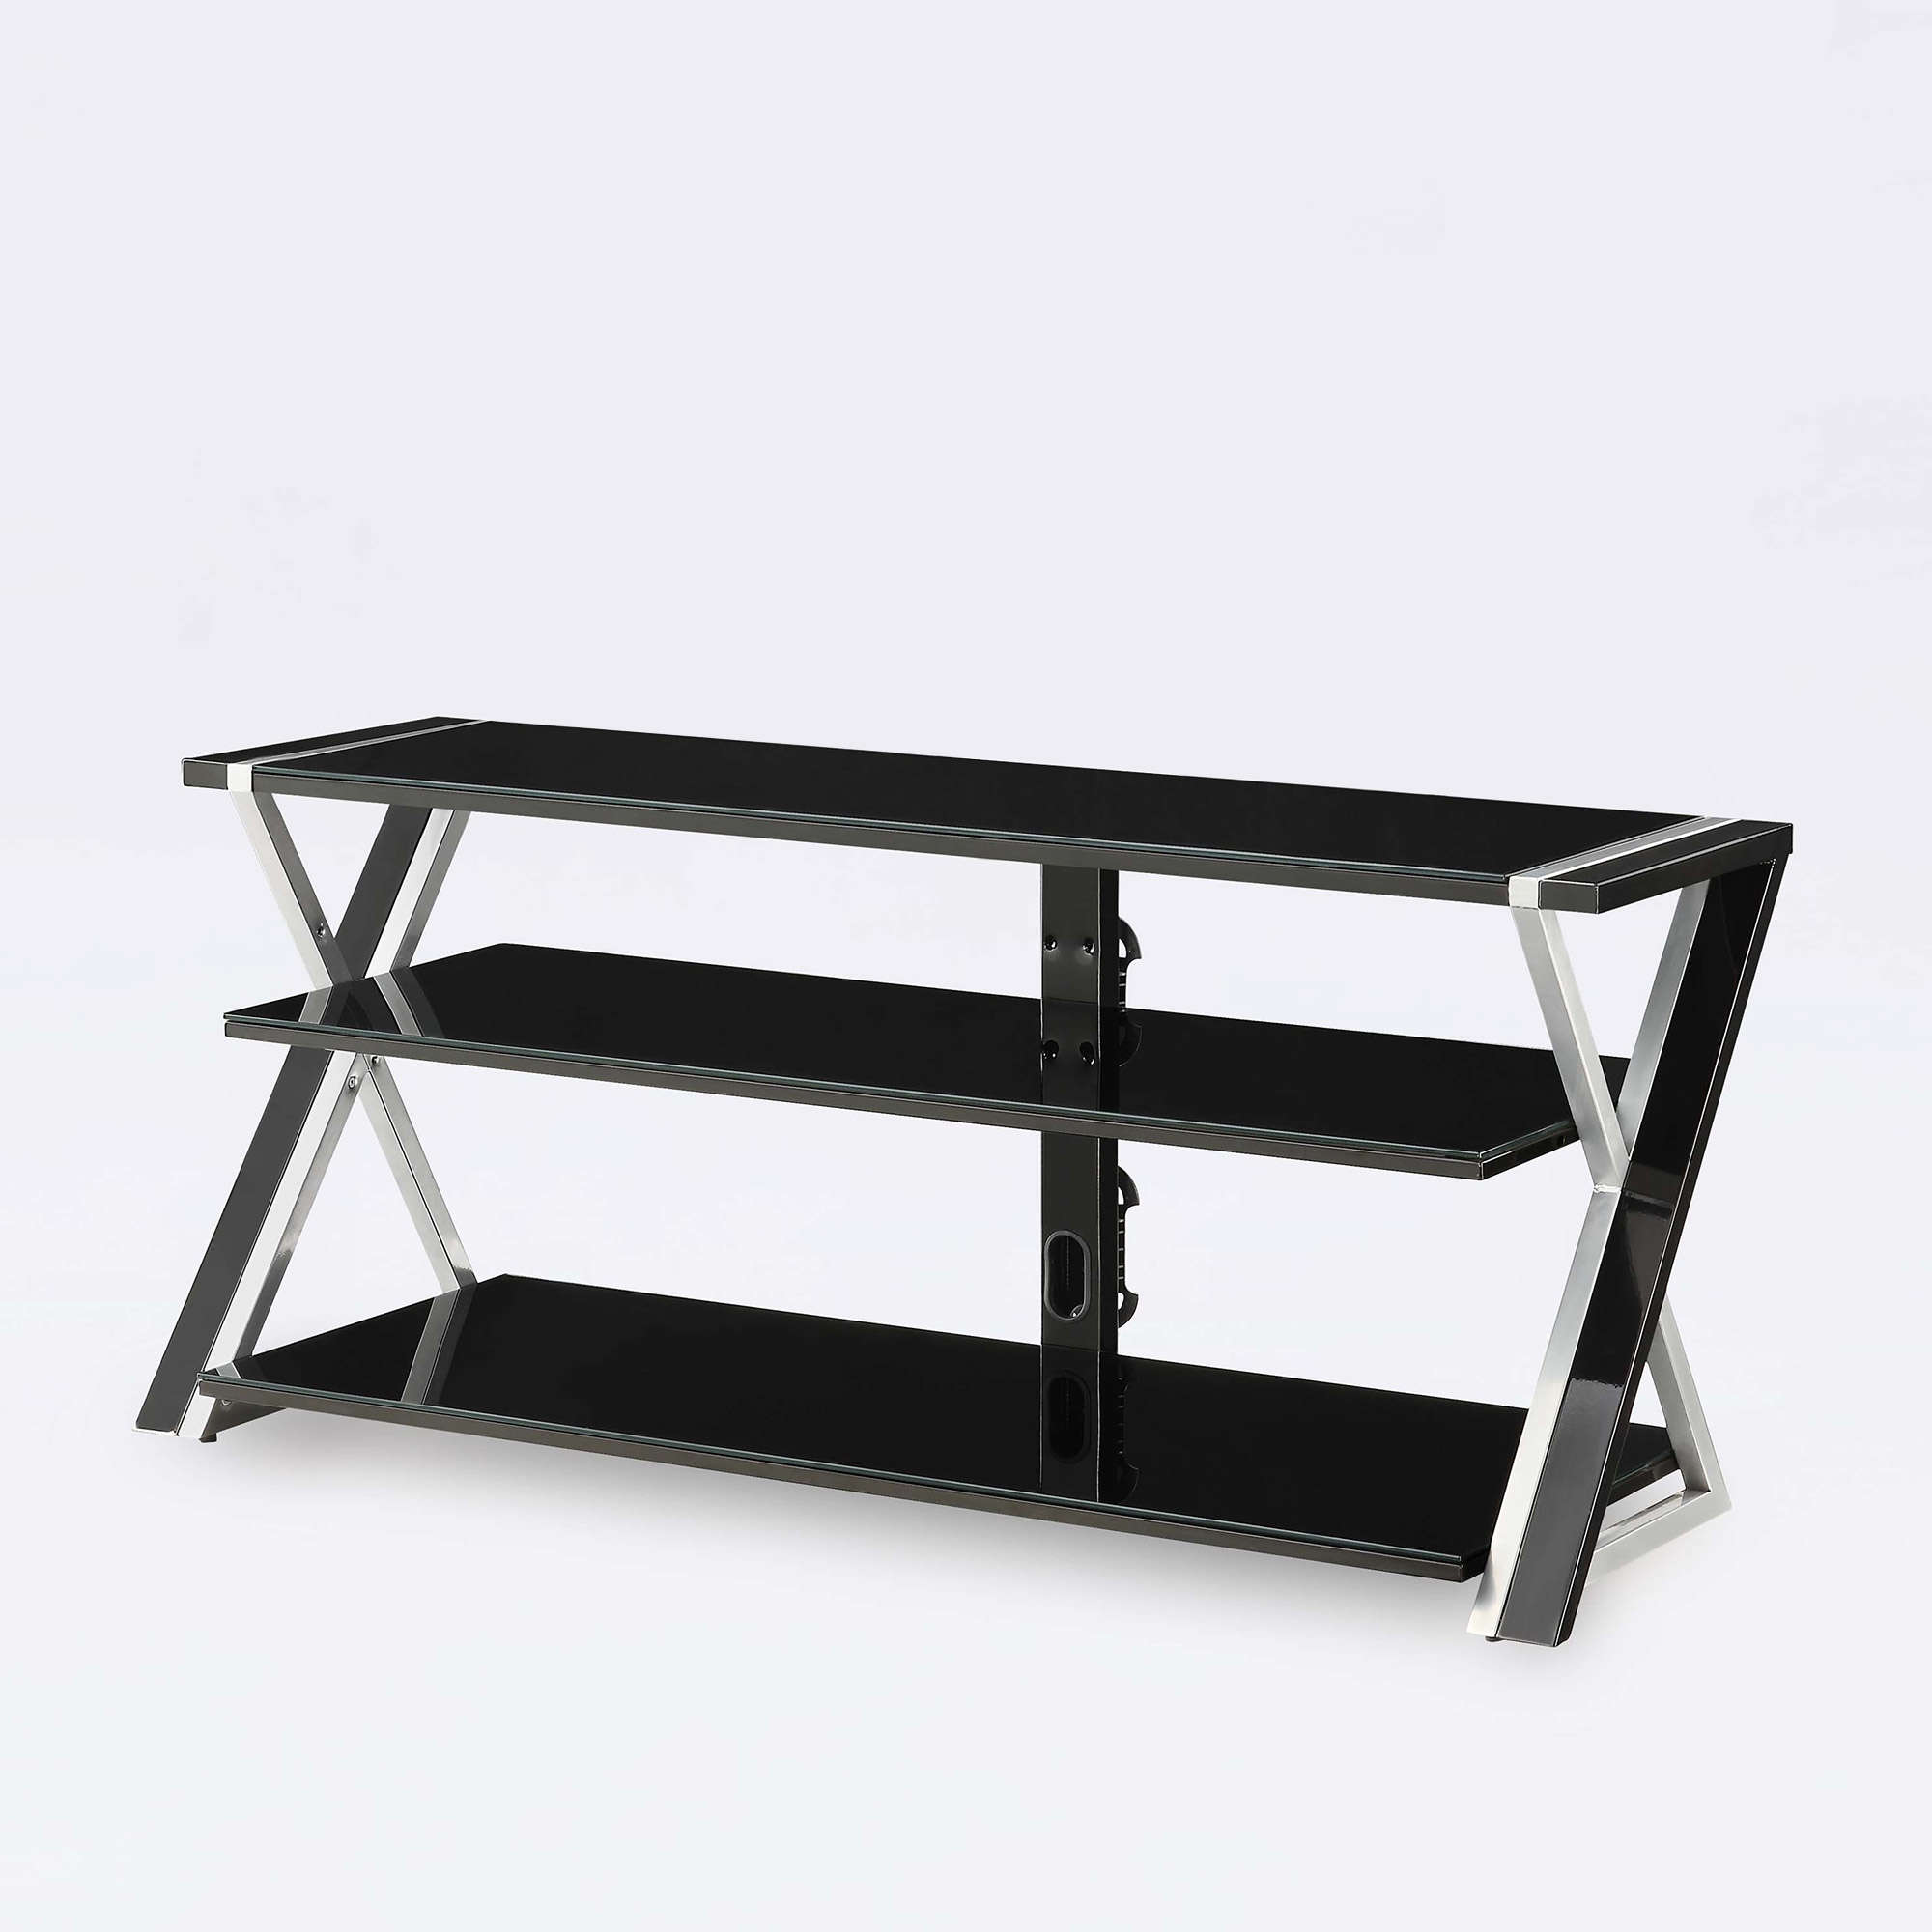 Whalen Furniture Black TV Stand for 60" Flat Panel TVs with Tempered Glass Shelves - image 4 of 4